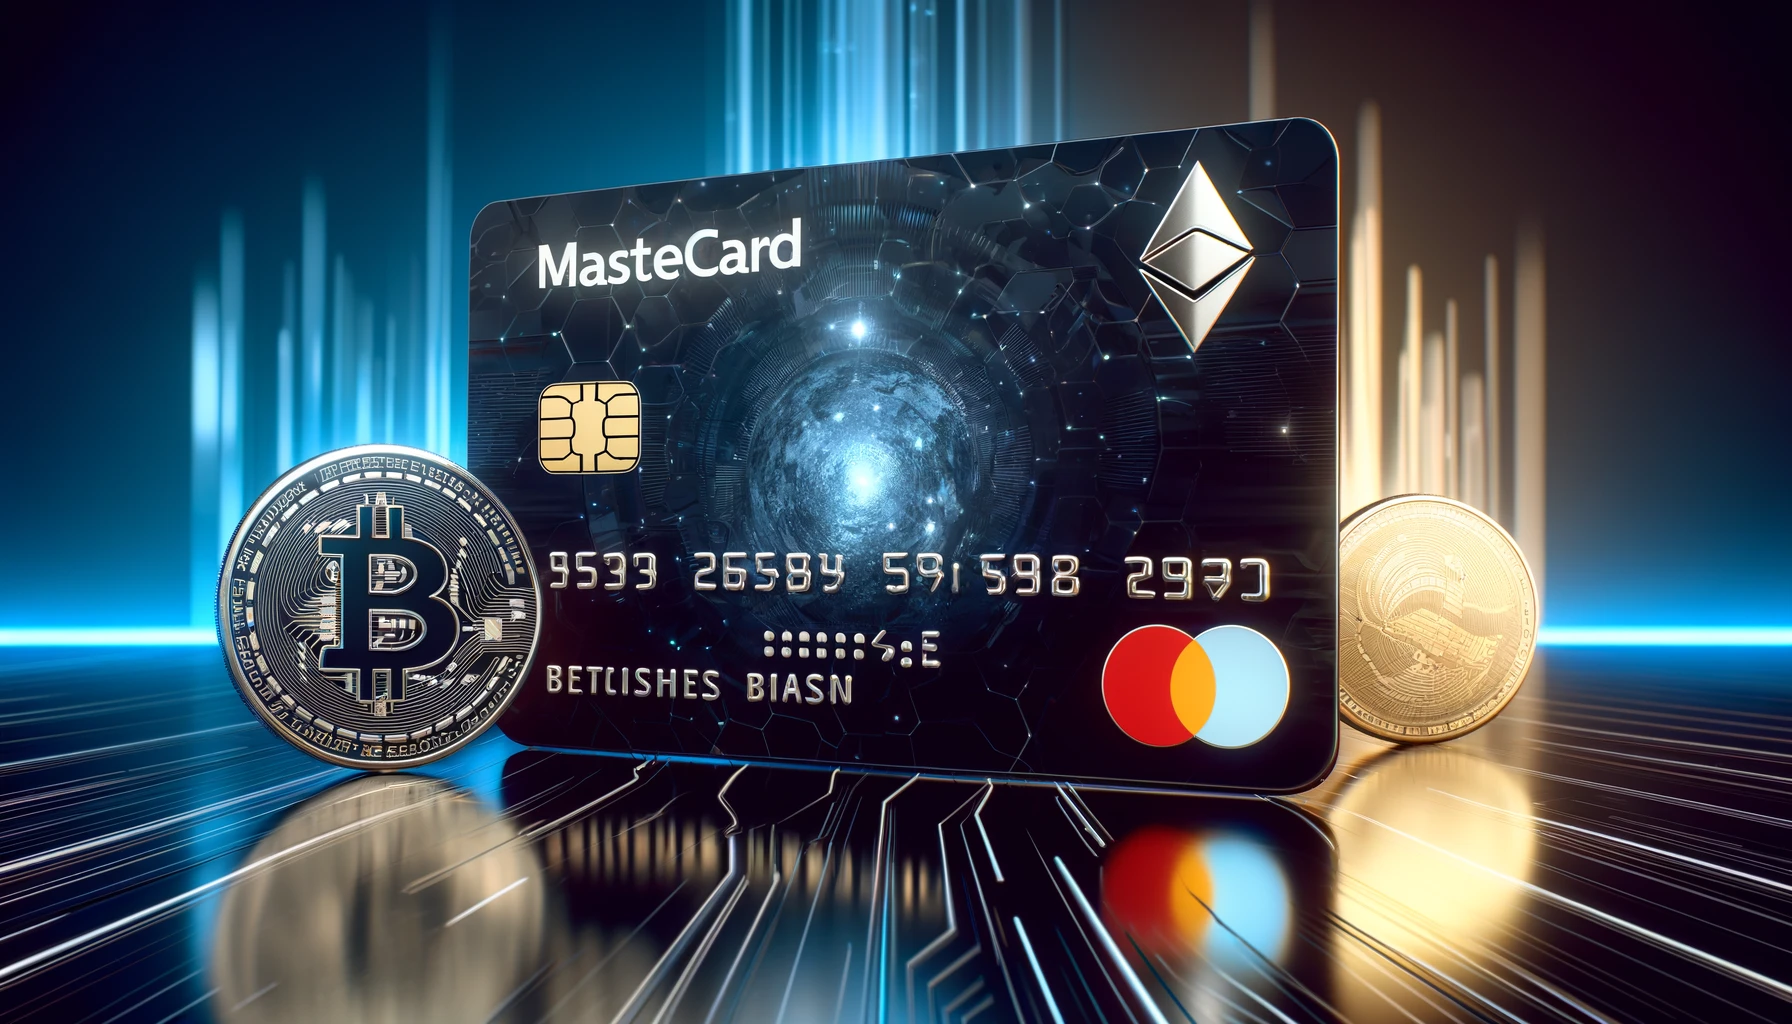 Mastercard’s new ‘Crypto Credential’ service aims to simplify crypto transfers